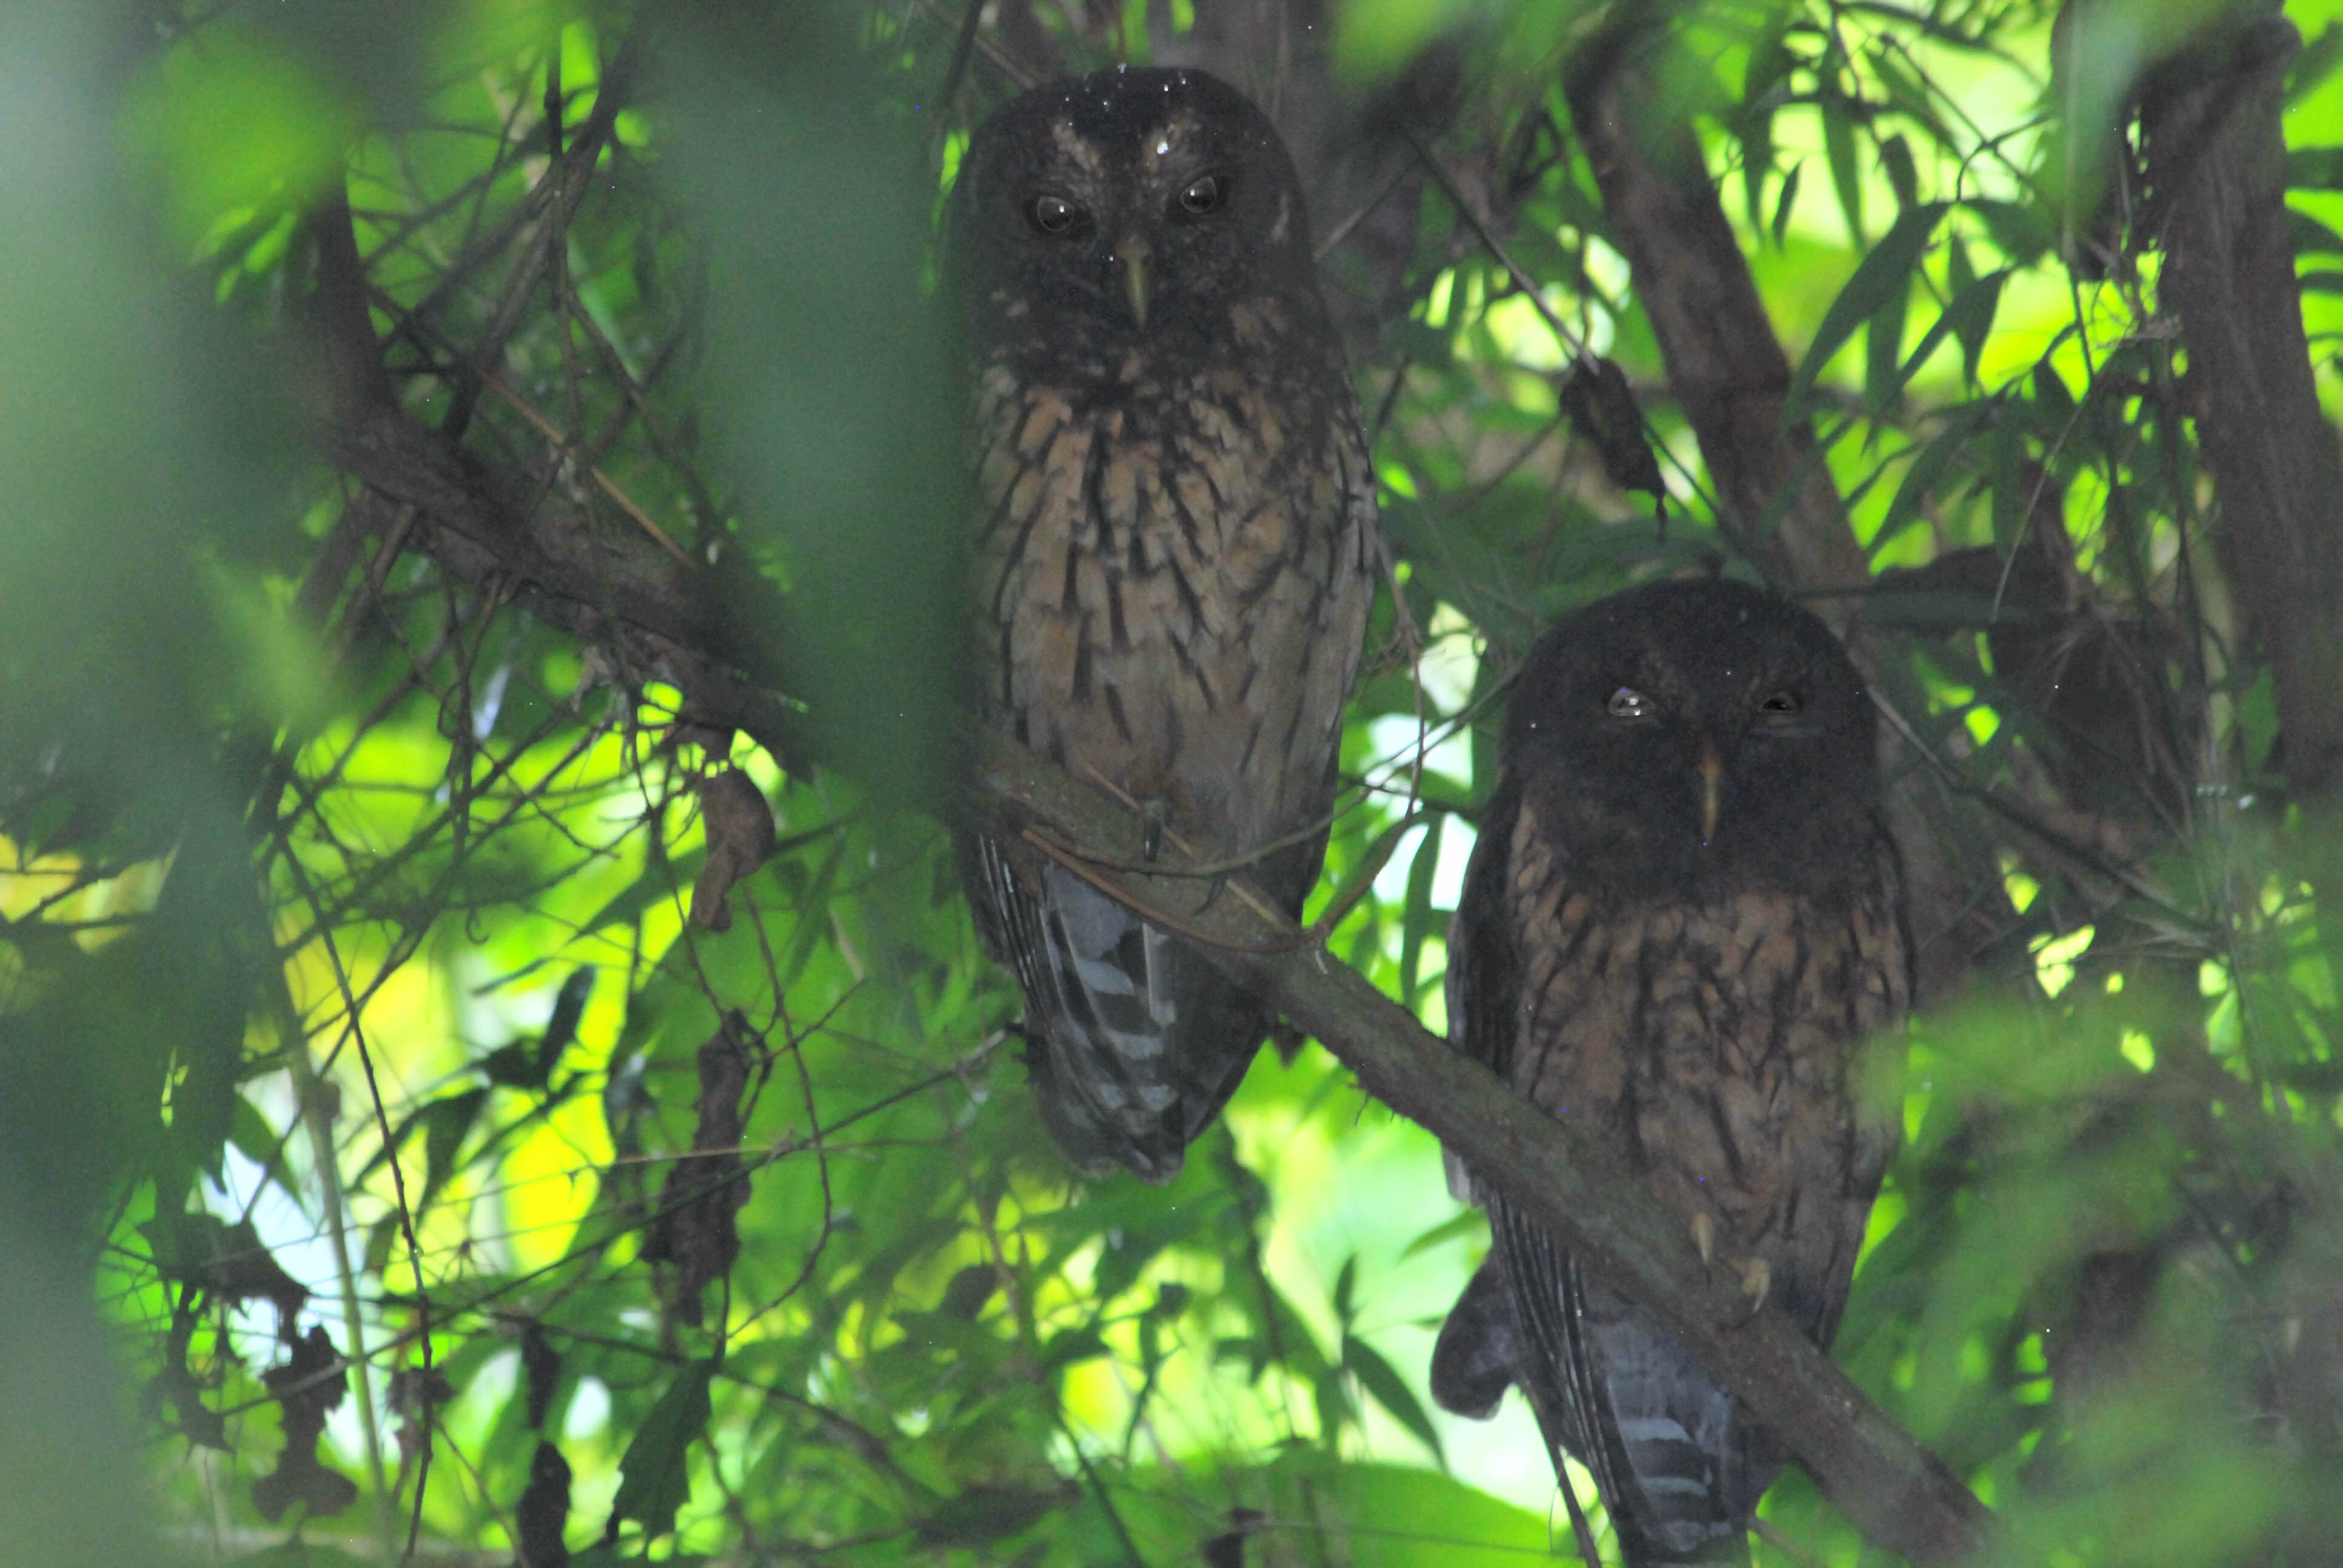 Click picture to see more Mottled Owlss.